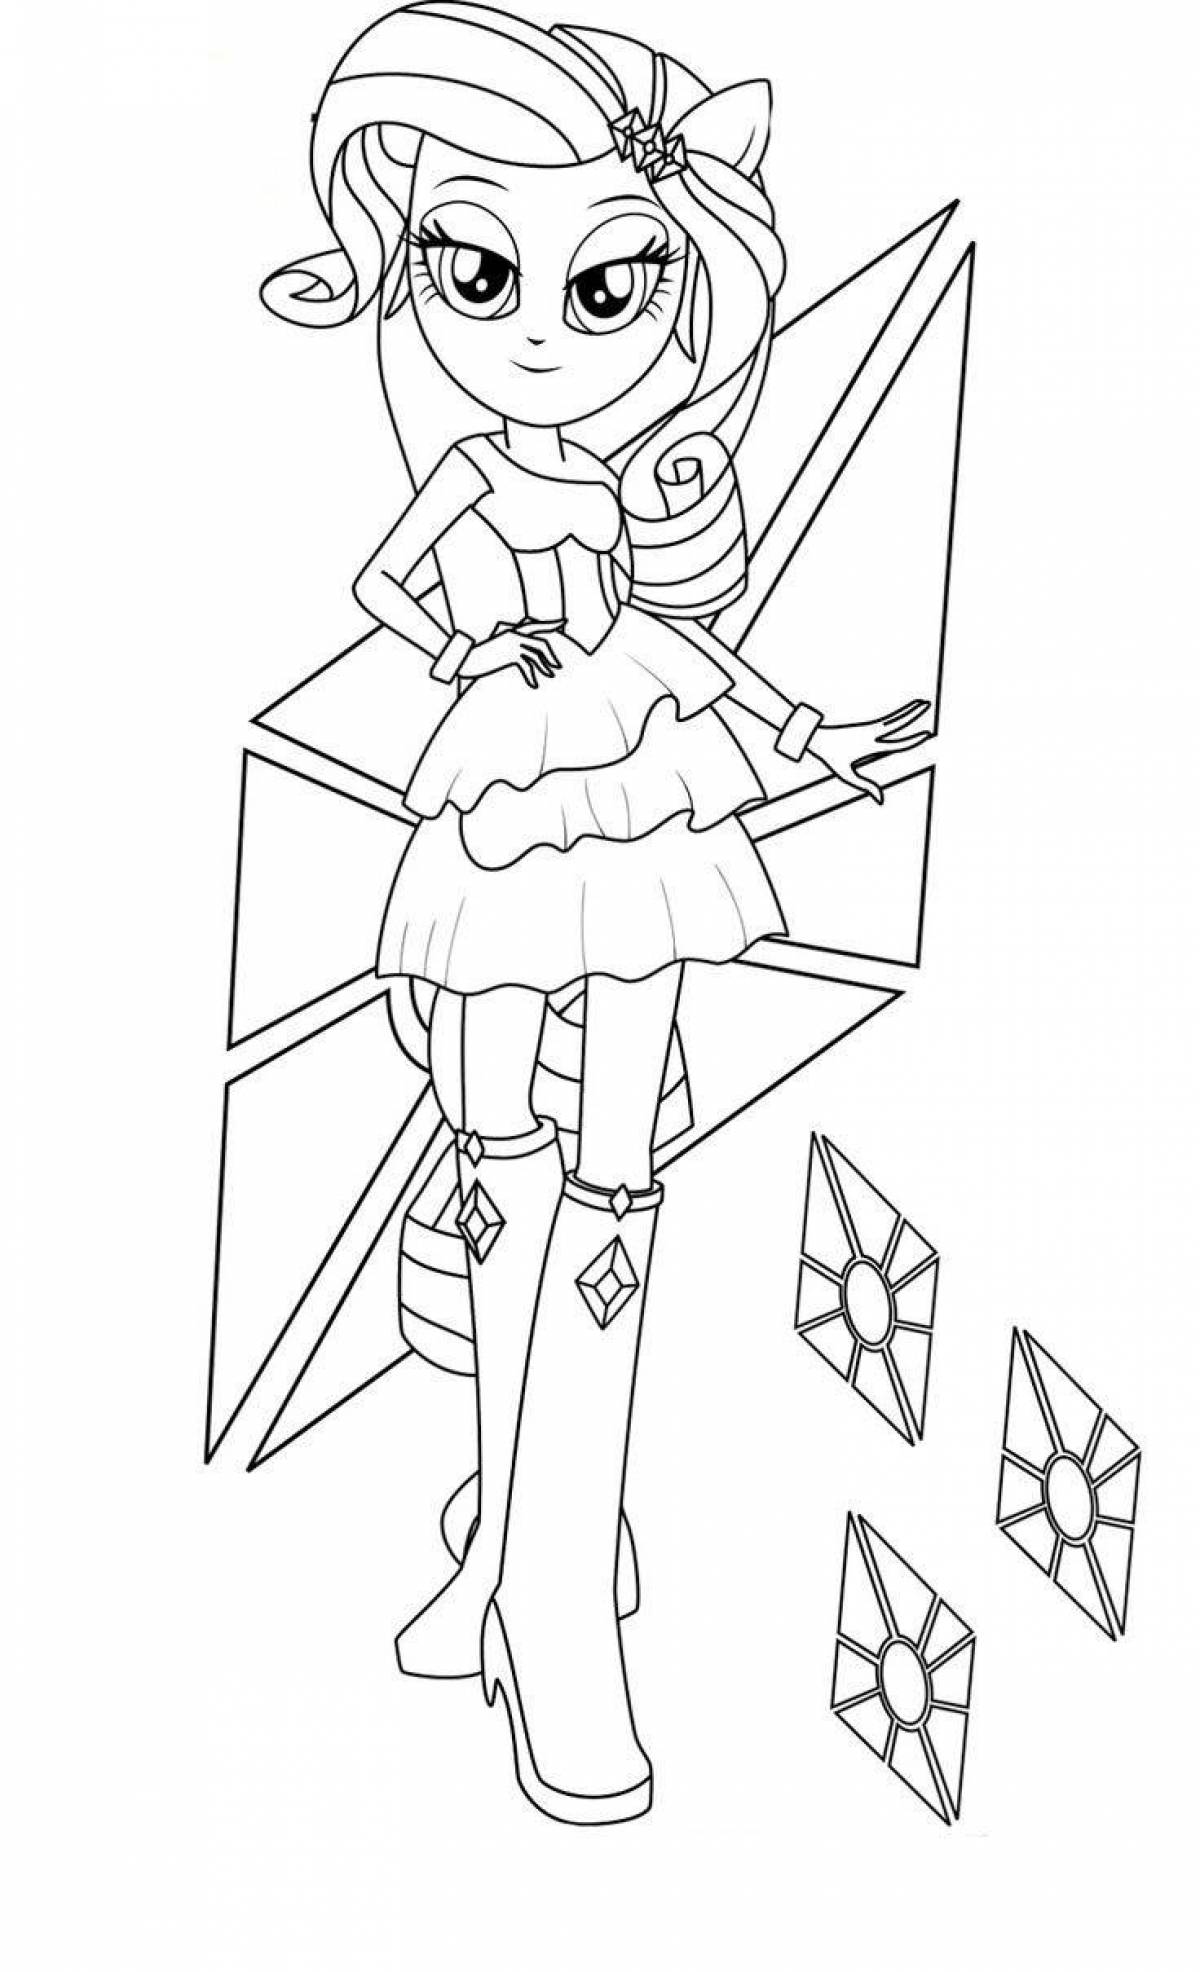 Coloring page friendly equestria girls